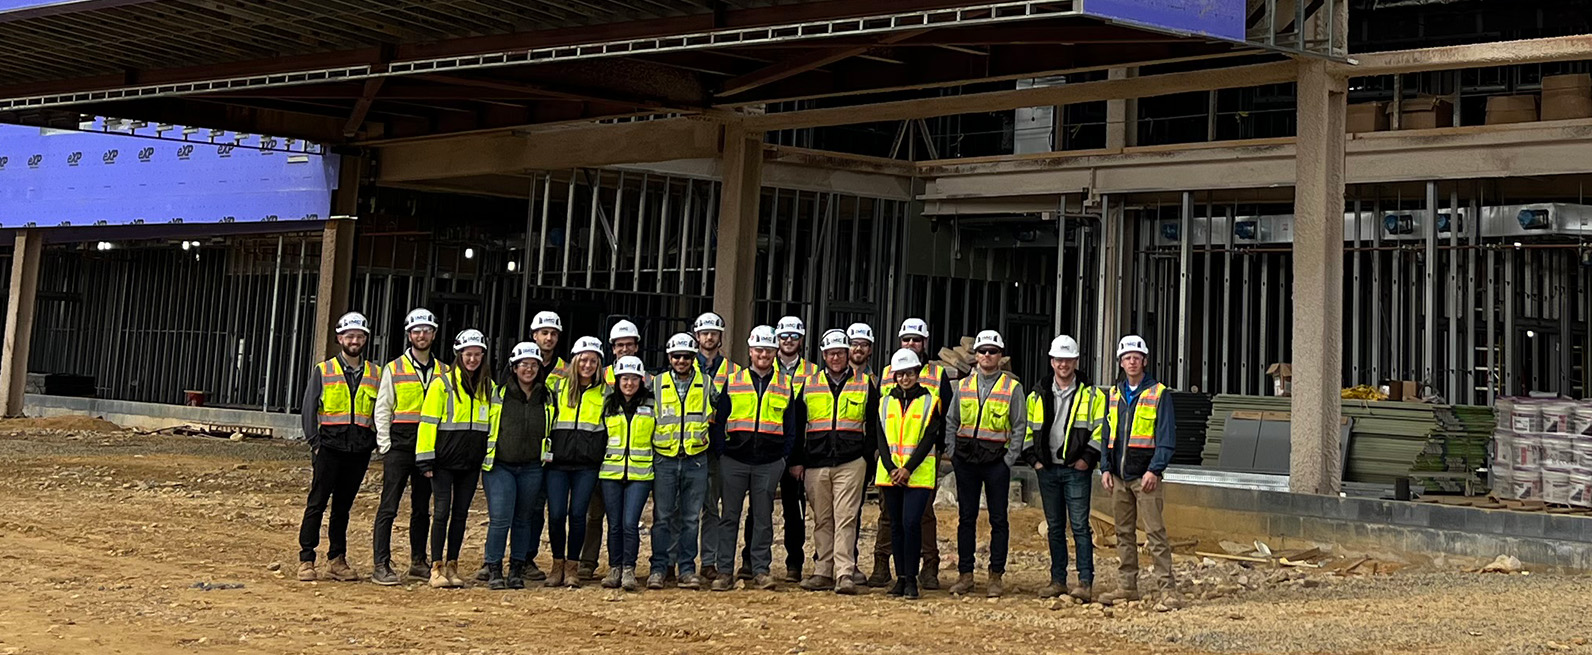 A group photo of IMC employees in hard hats and safety vests on a job site.